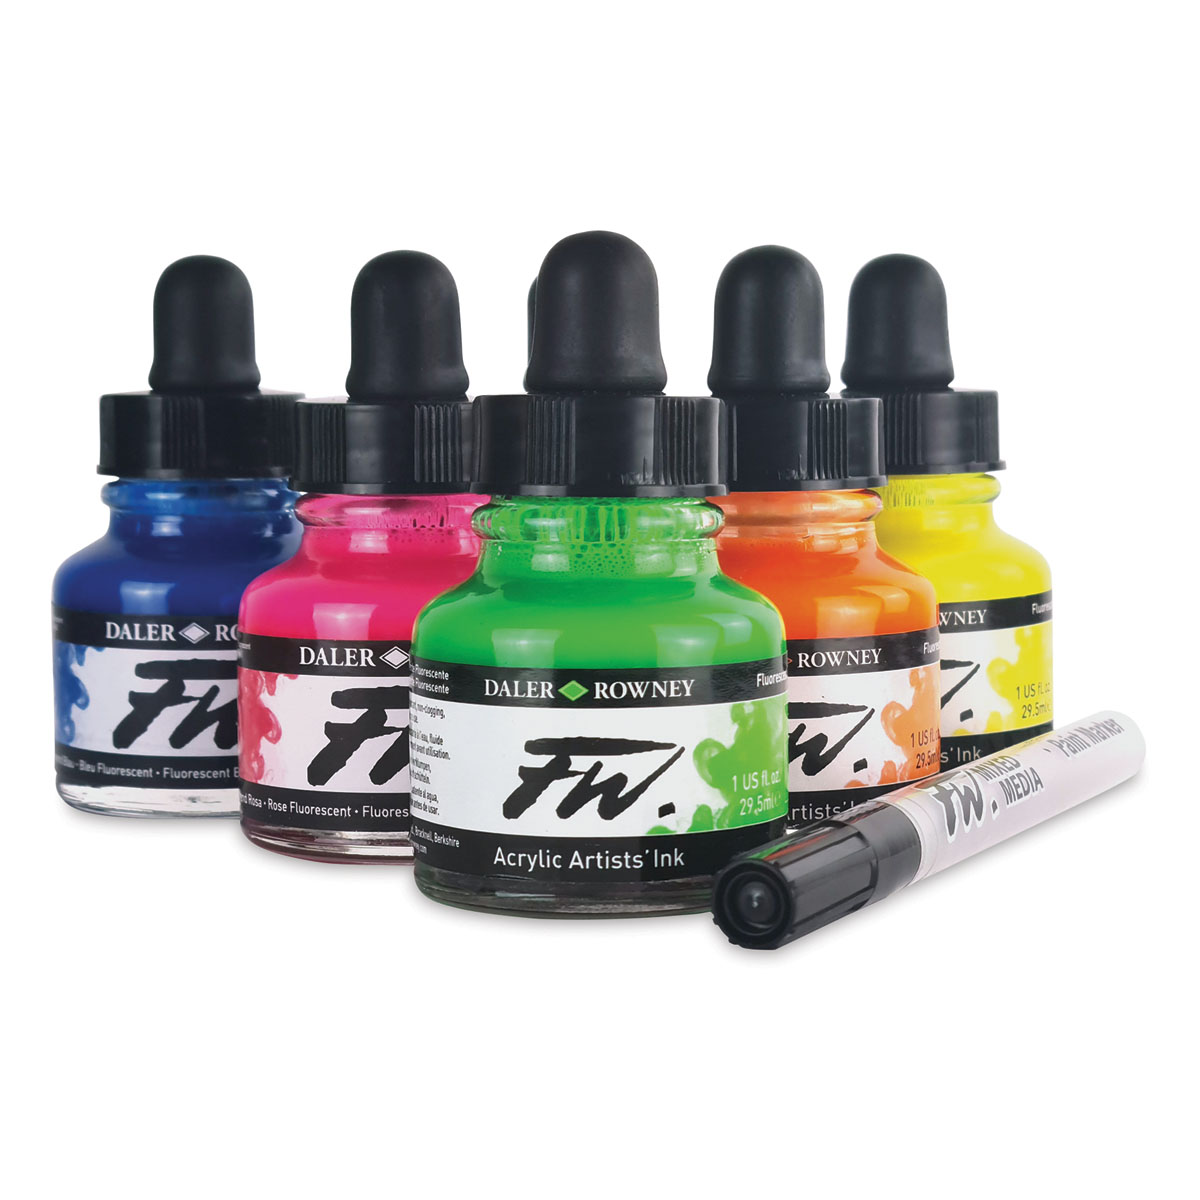  Daler-Rowney FW Acrylic Ink Bottle Fluorescent Pink - Versatile  Acrylic Drawing Ink for Artists and Students - Permanent Calligraphy Ink -  Archival Ink for Illustrating and More